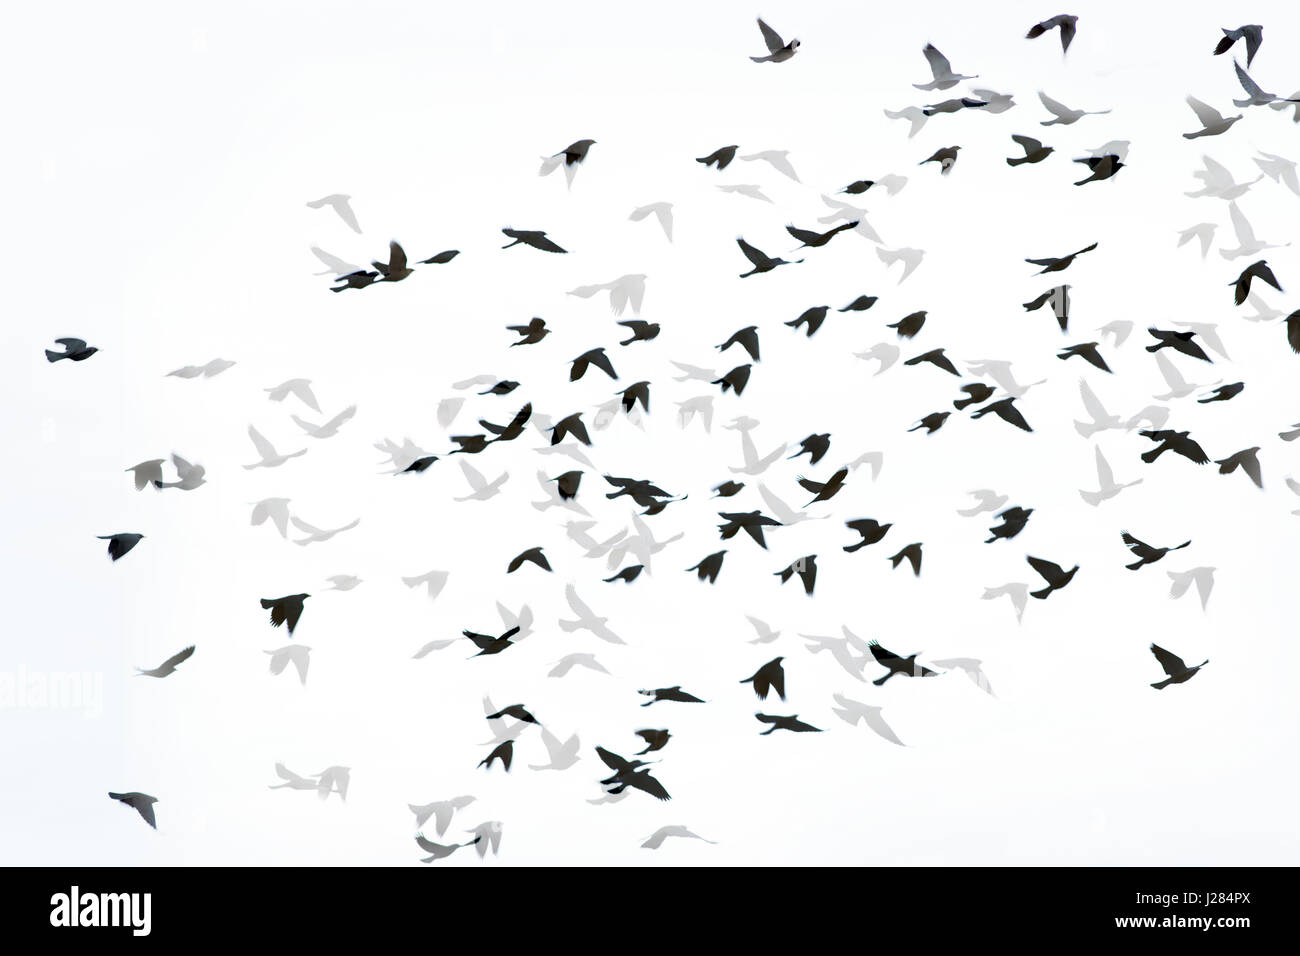 Digital composite image of silhouette birds flying with shadows on white background Stock Photo